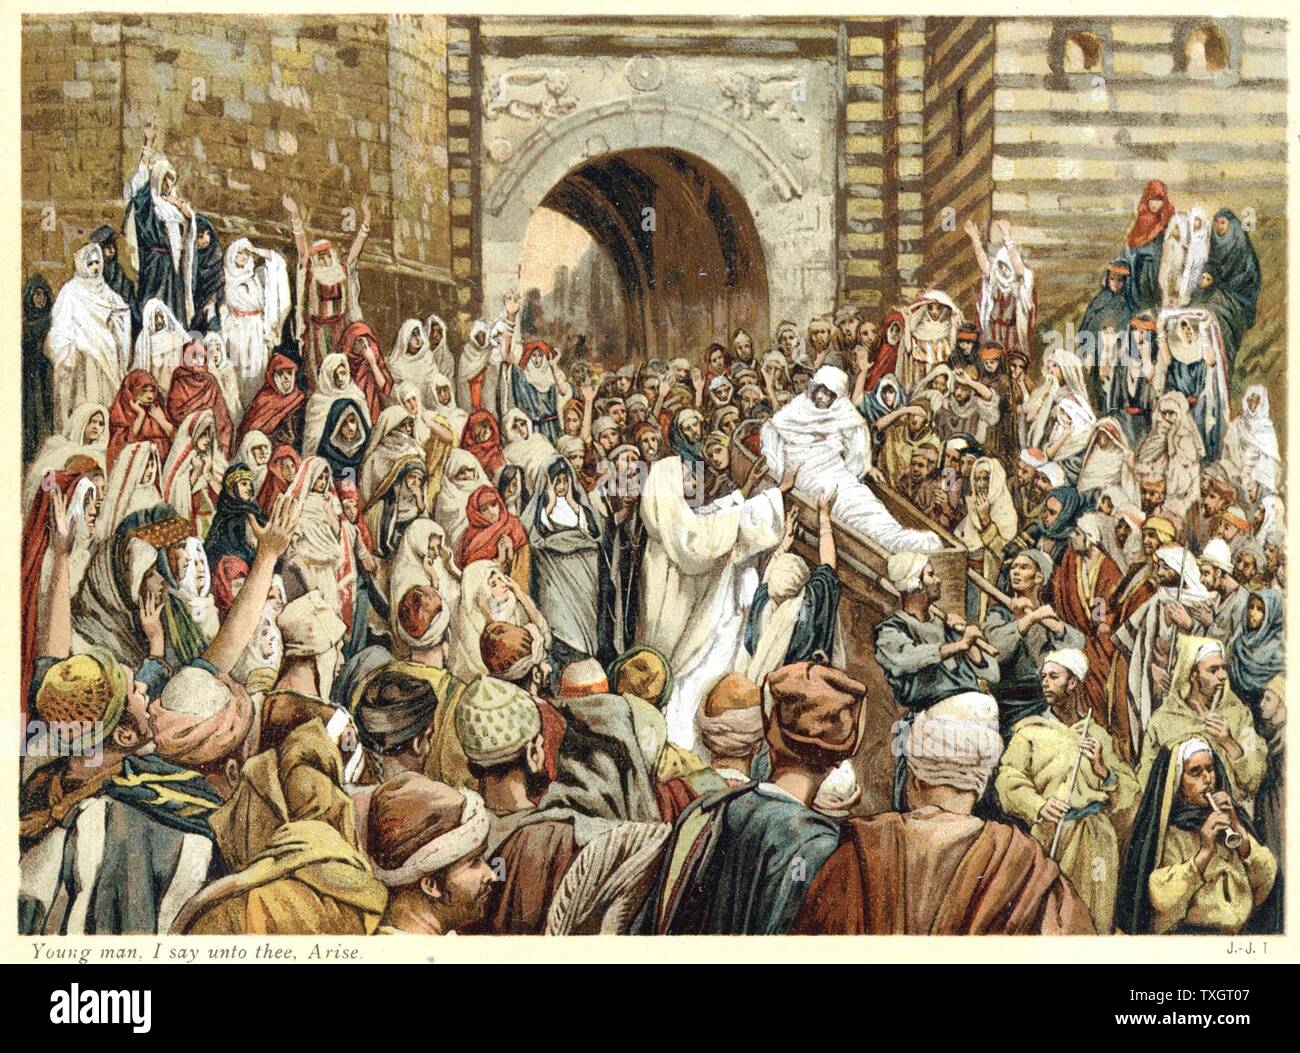 Jesus raising the widow's son at Nain. 'Young Man, I say unto thee, Arise.'  Bible, New Testament, St Luke Ch. 7. Name of young man said to be Quadratus.   c.1890.  From J.J. Tissot 'The Life ouf our Saviour Jesus Christ'  Oleograph. Colour Stock Photo